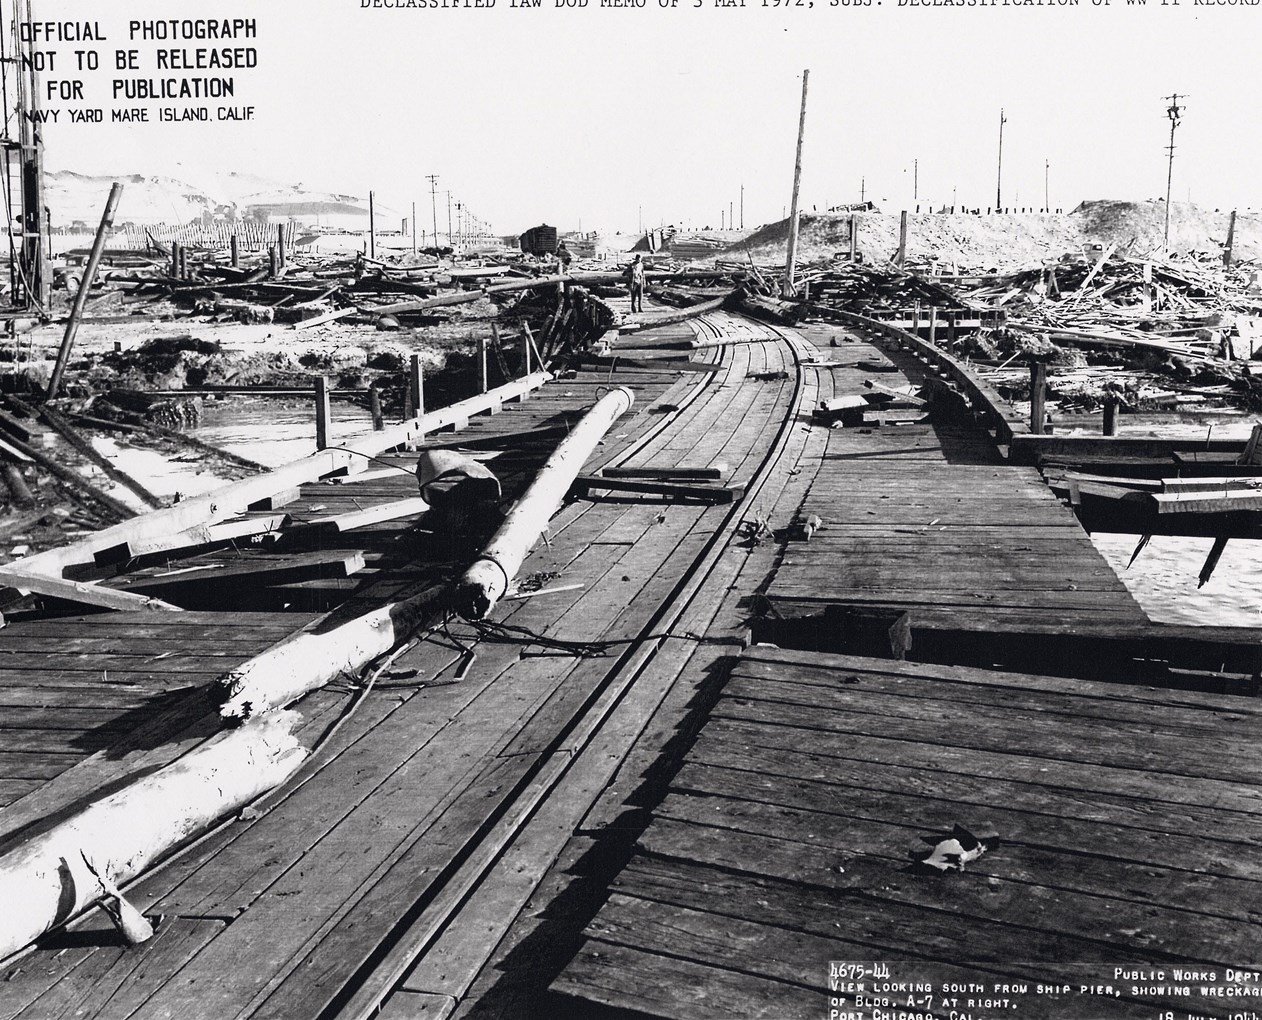 Historic Black and white photo of the disaster aftermath. Railroad tracks and debris.